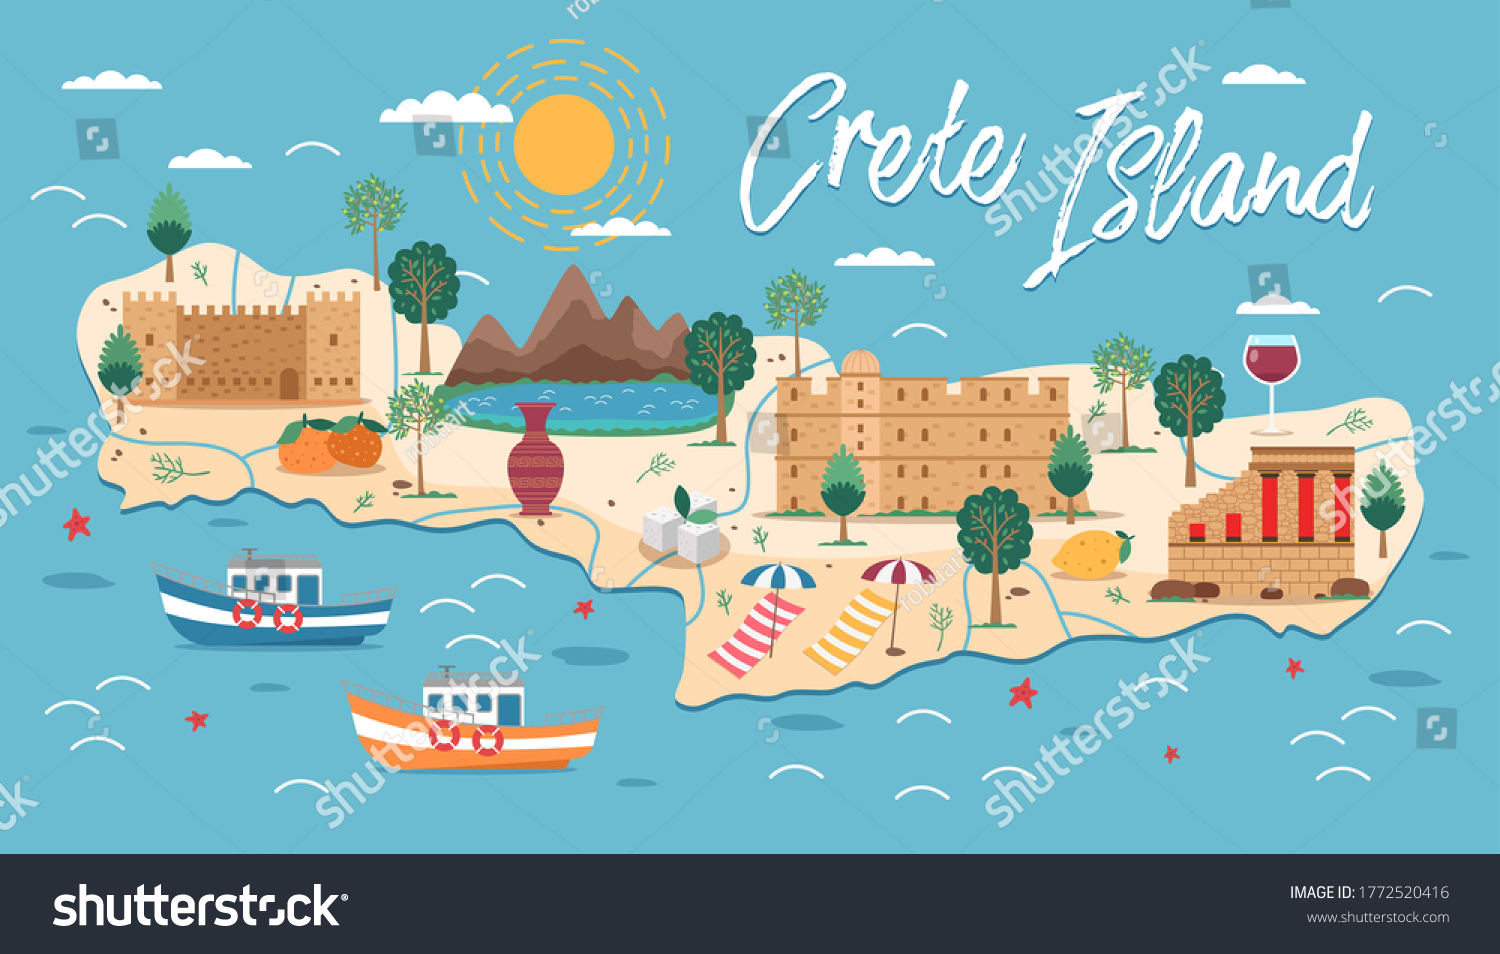 SVG of Crete island map with architecture illustration. Crete famous landmarks, city sights. Greece beach landscape. Bay of Chania, Heraklion. Greece Knossos Palace ceremonial and political centre of Minoan svg